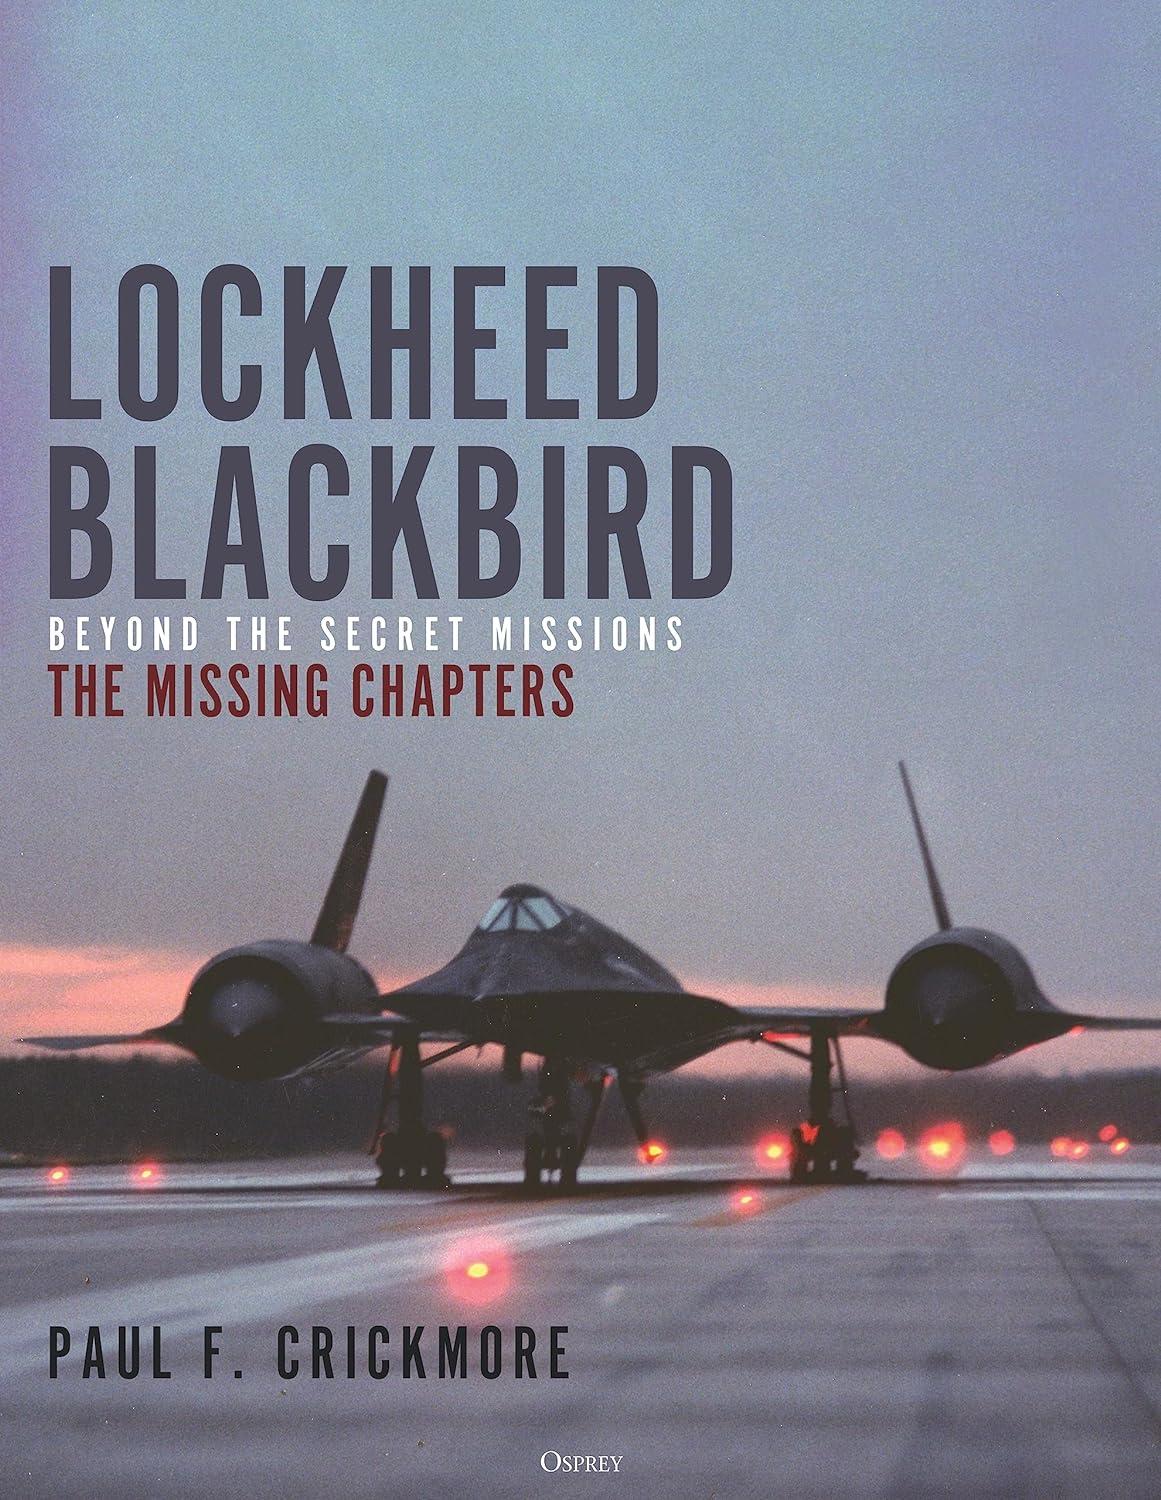 "Lockheed Blackbird: Beyond the Secret Missions – The Missing Chapters," by Paul F. Crickmore.